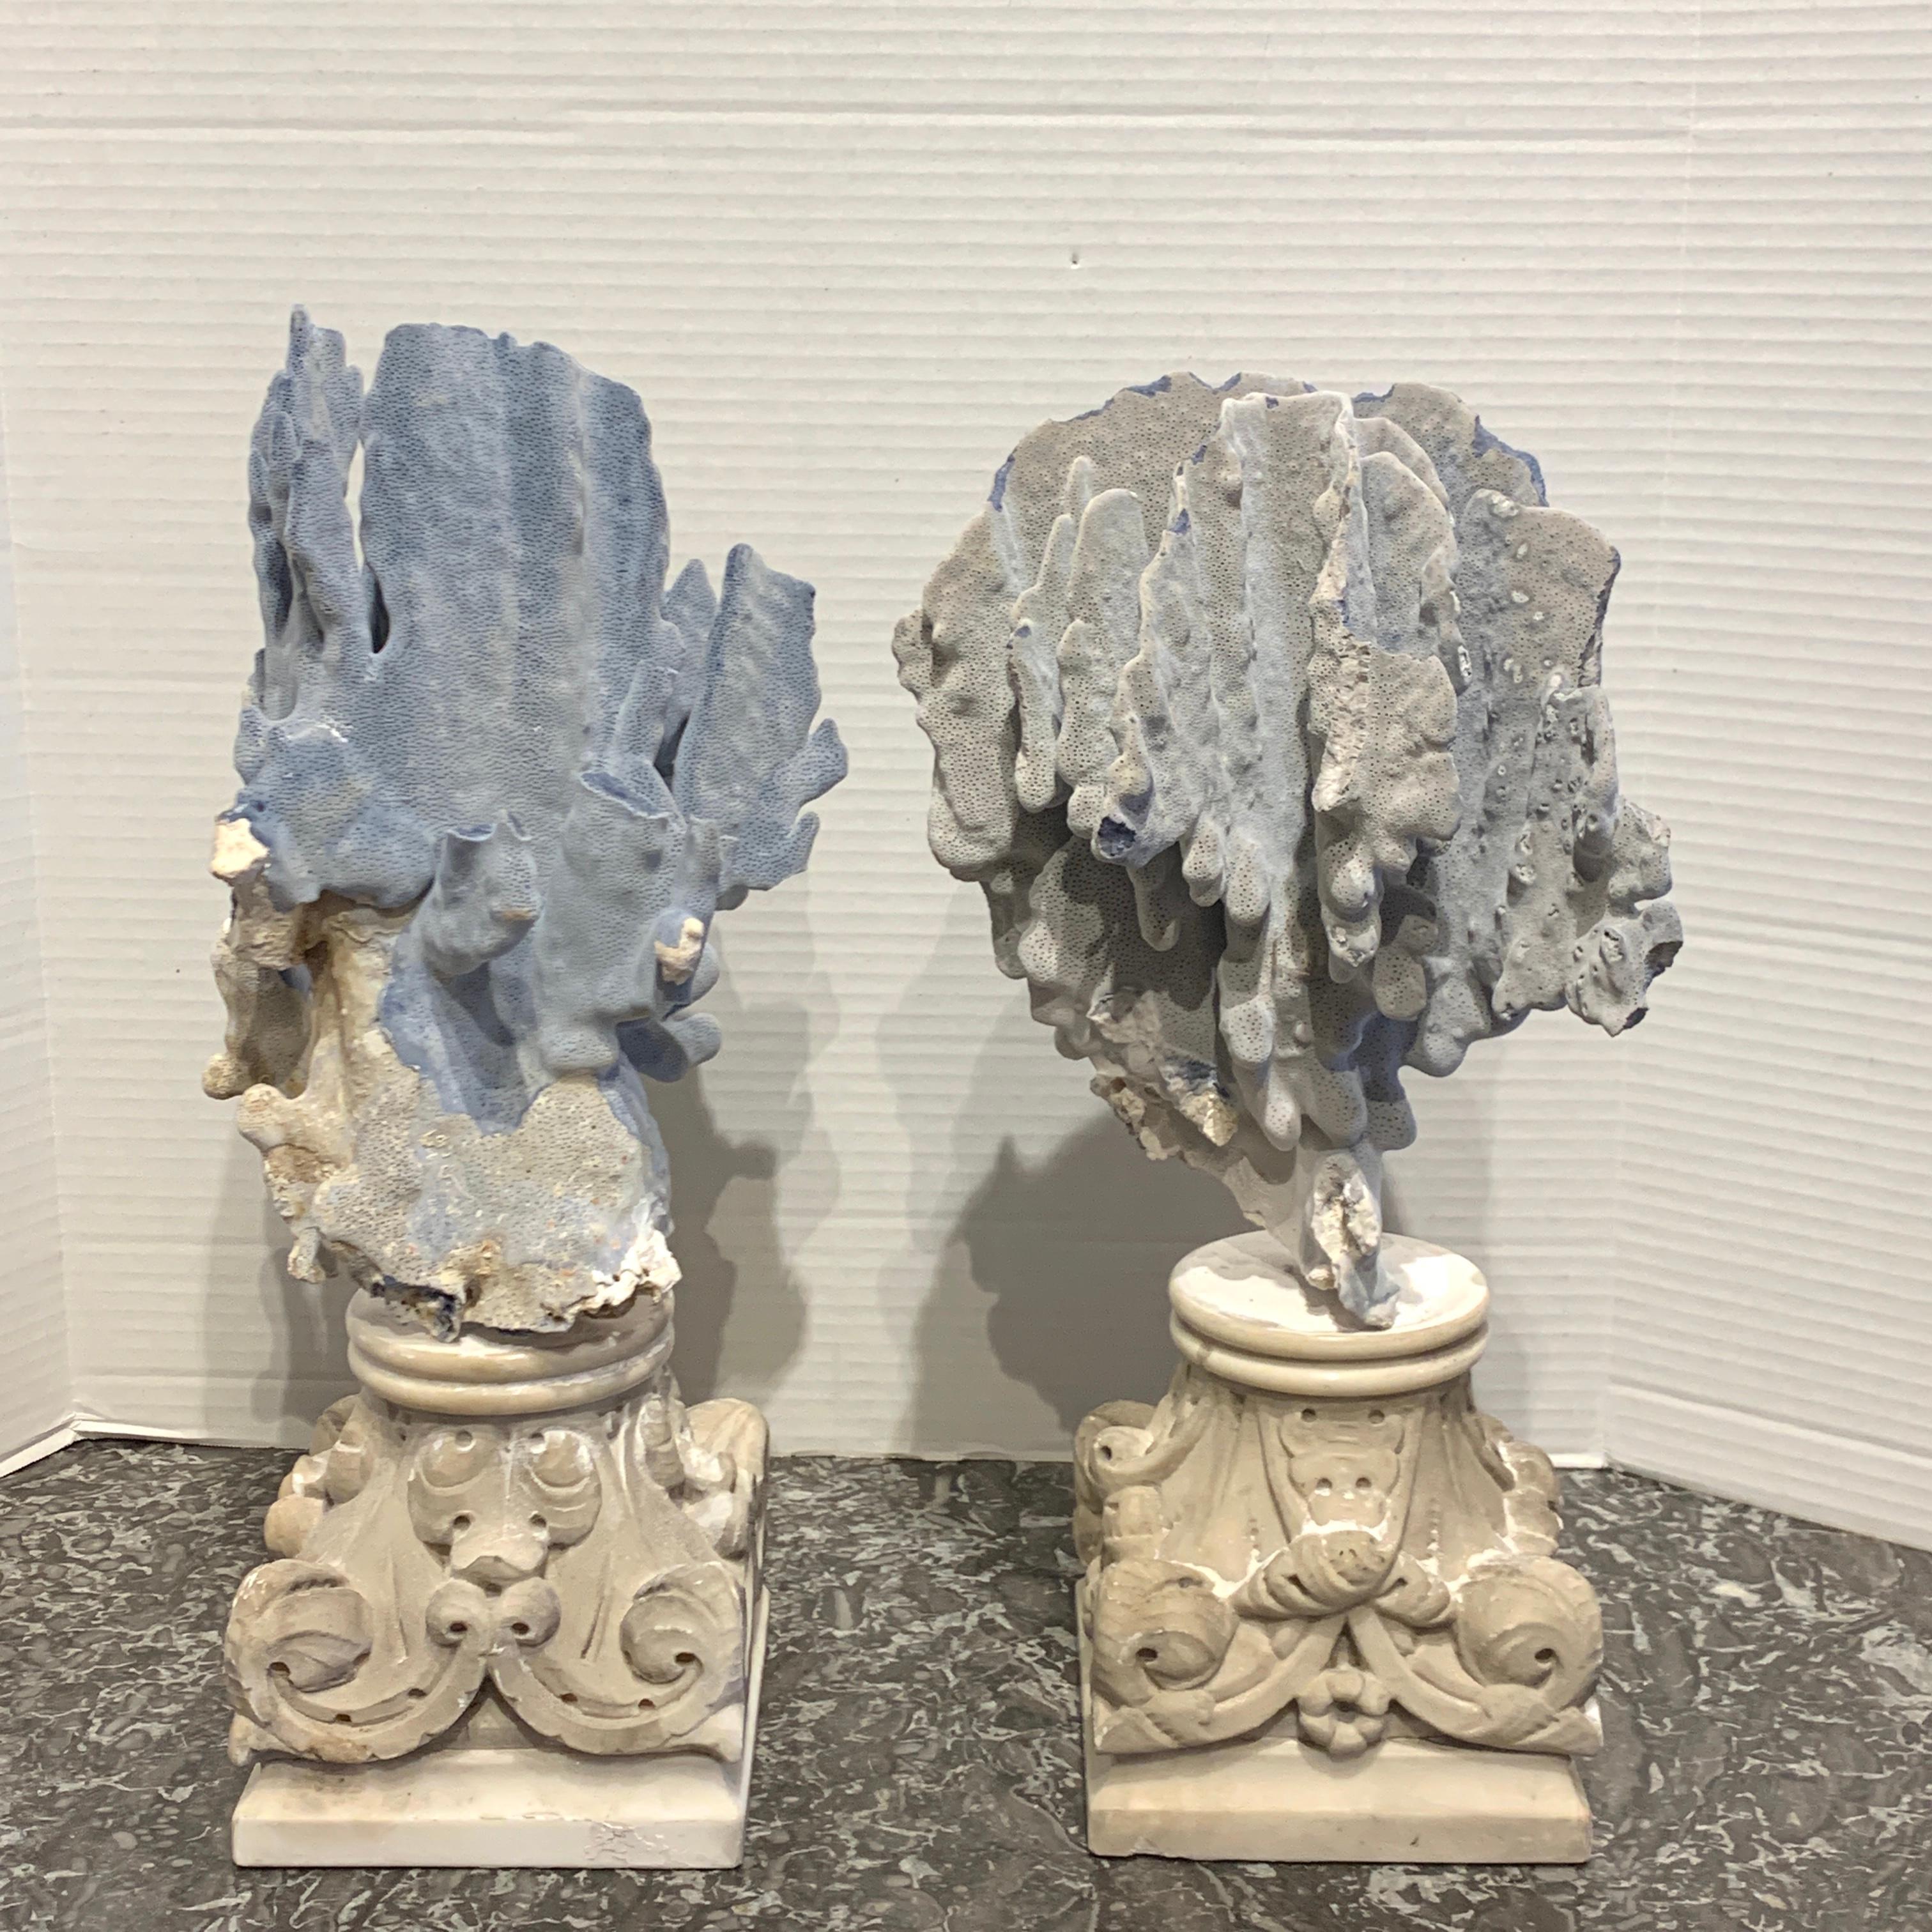 Neoclassical Pair of 19th Century Grand Tour Specimen Blue Coral on Carrera Marble Pedestals